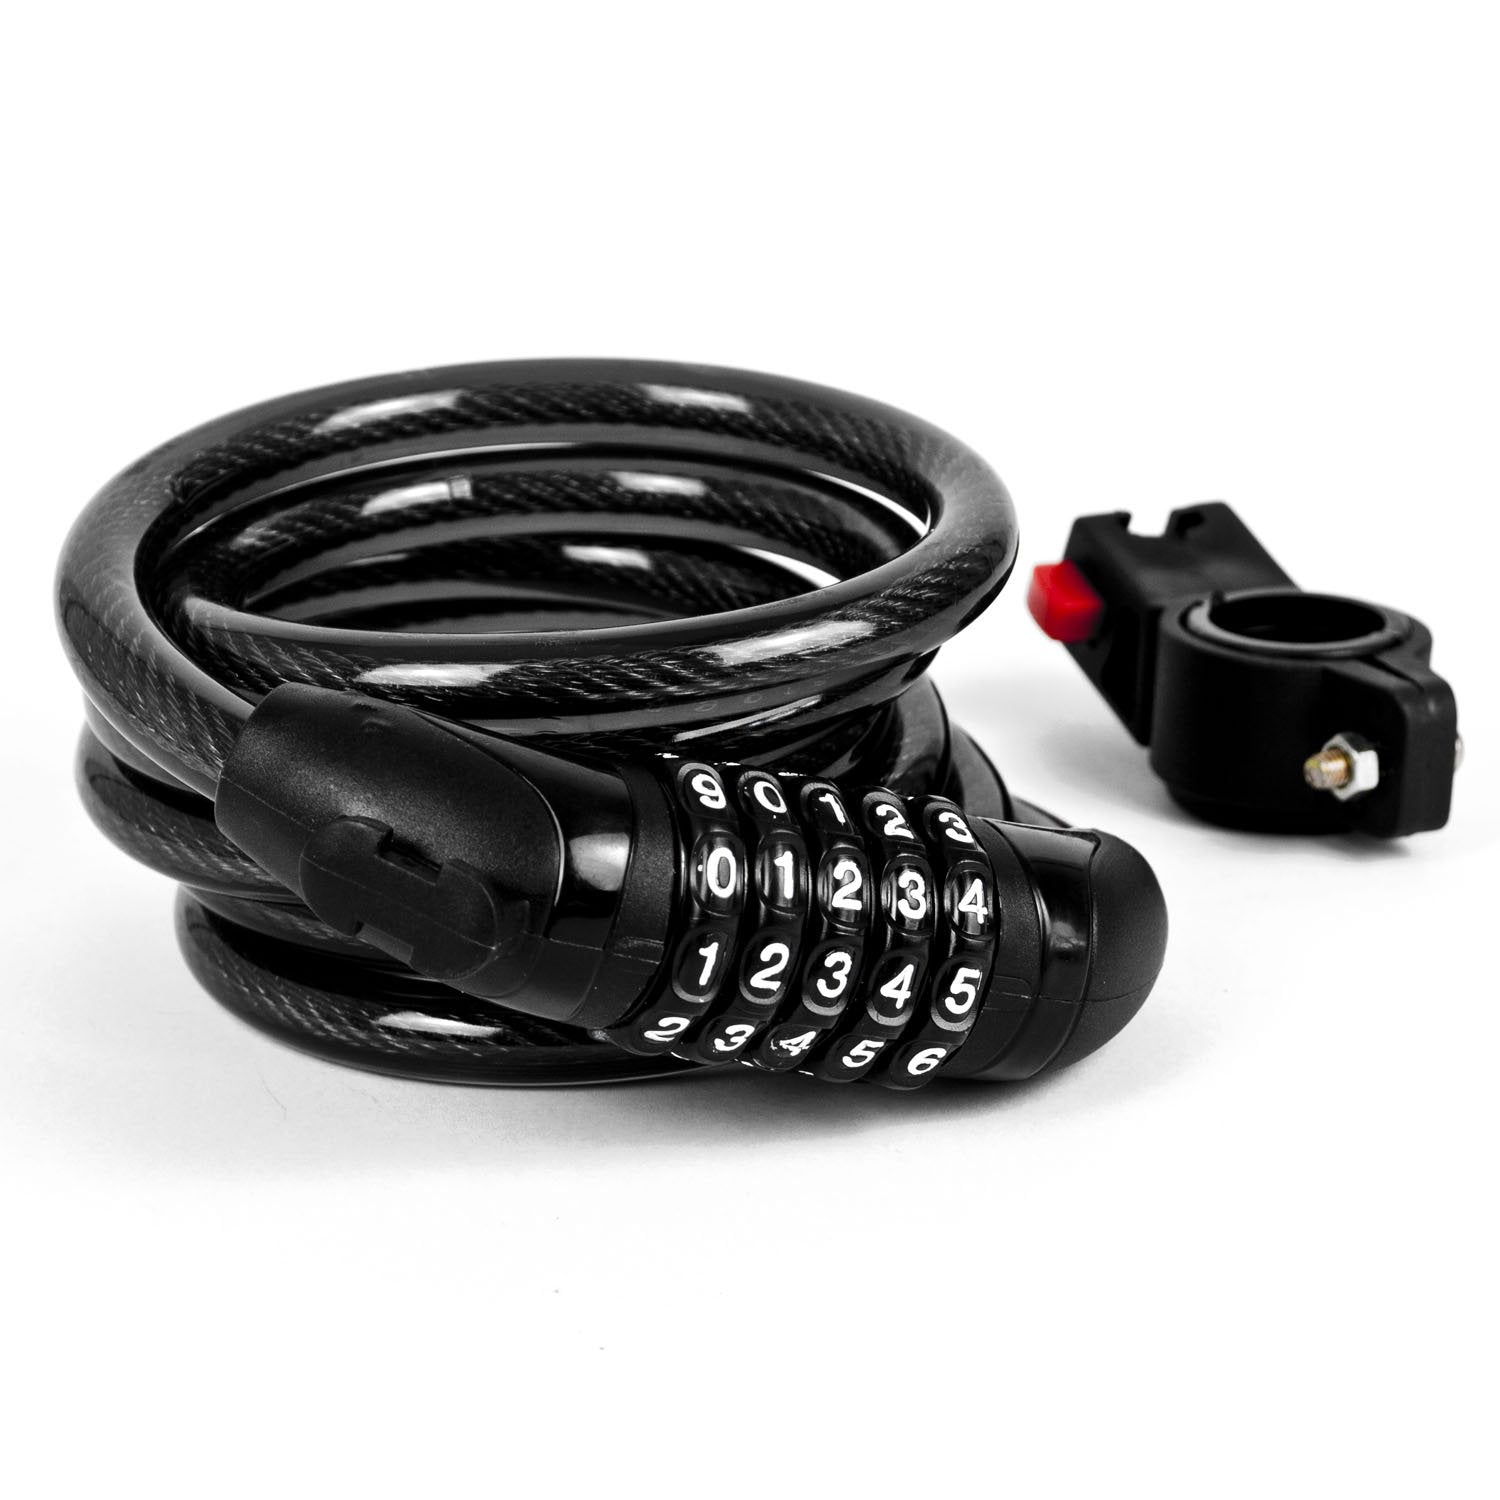 5 Digit Cable Bicycle Lock - 1.8m - Inspirely